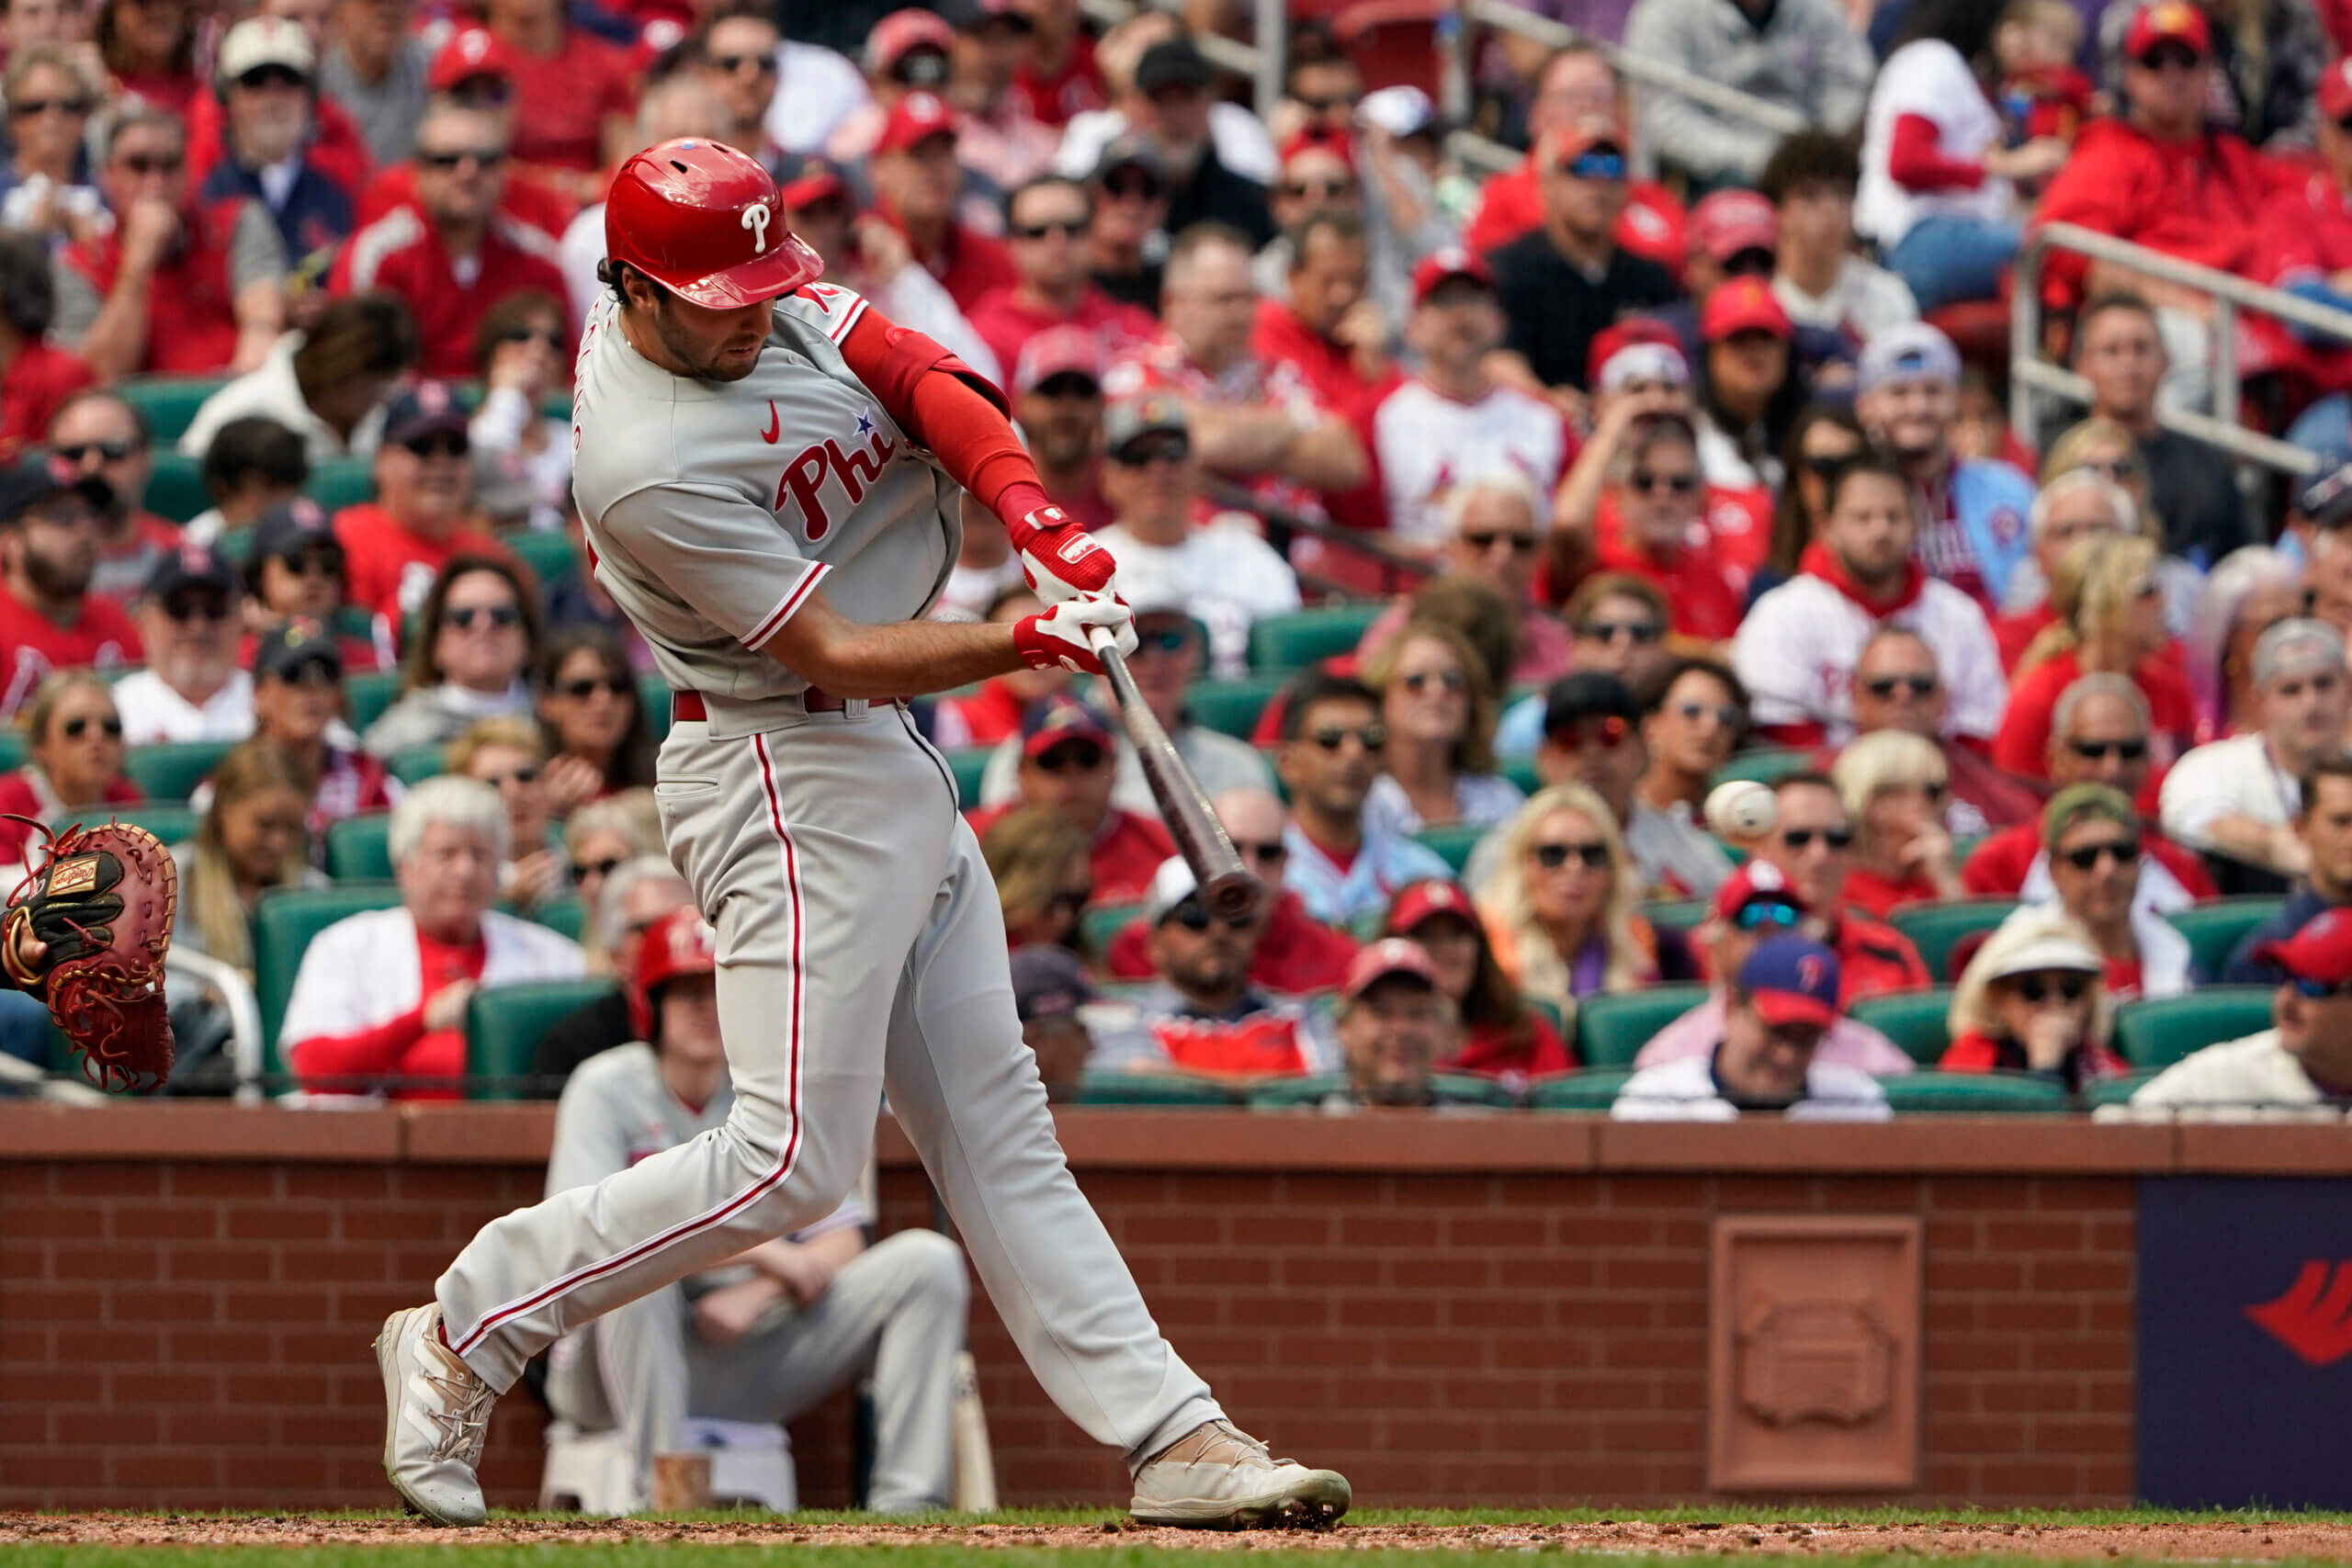 Phillies rally in the ninth, only to fall short (again) against